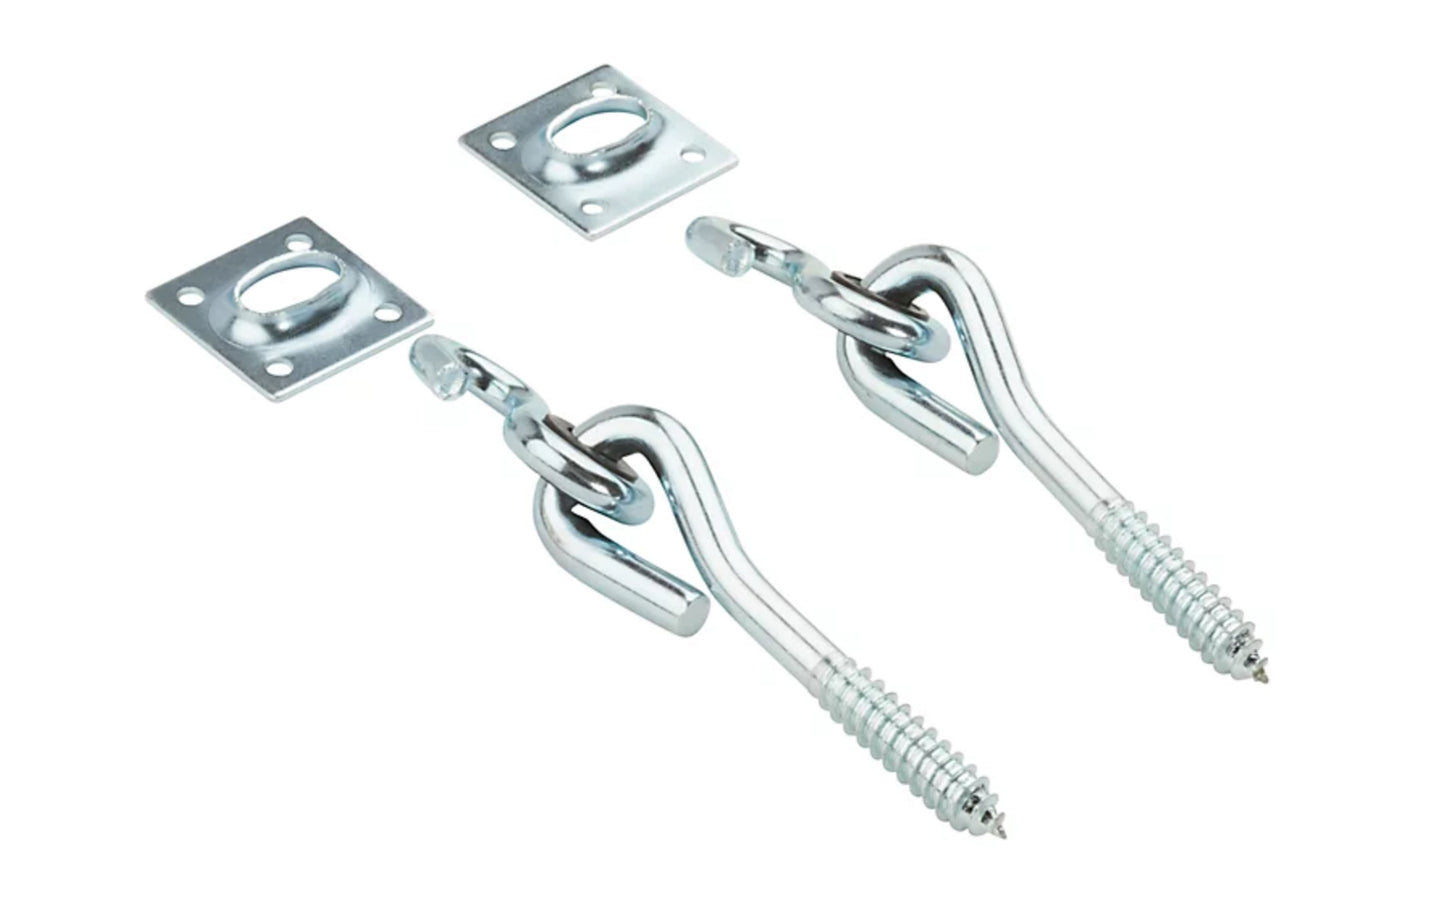 Zinc-Plated Swing Hook Set - Wood Screw Thread. Designed for hanging outdoor equipment on wooden beams. National Hardware Model No. N264-069.